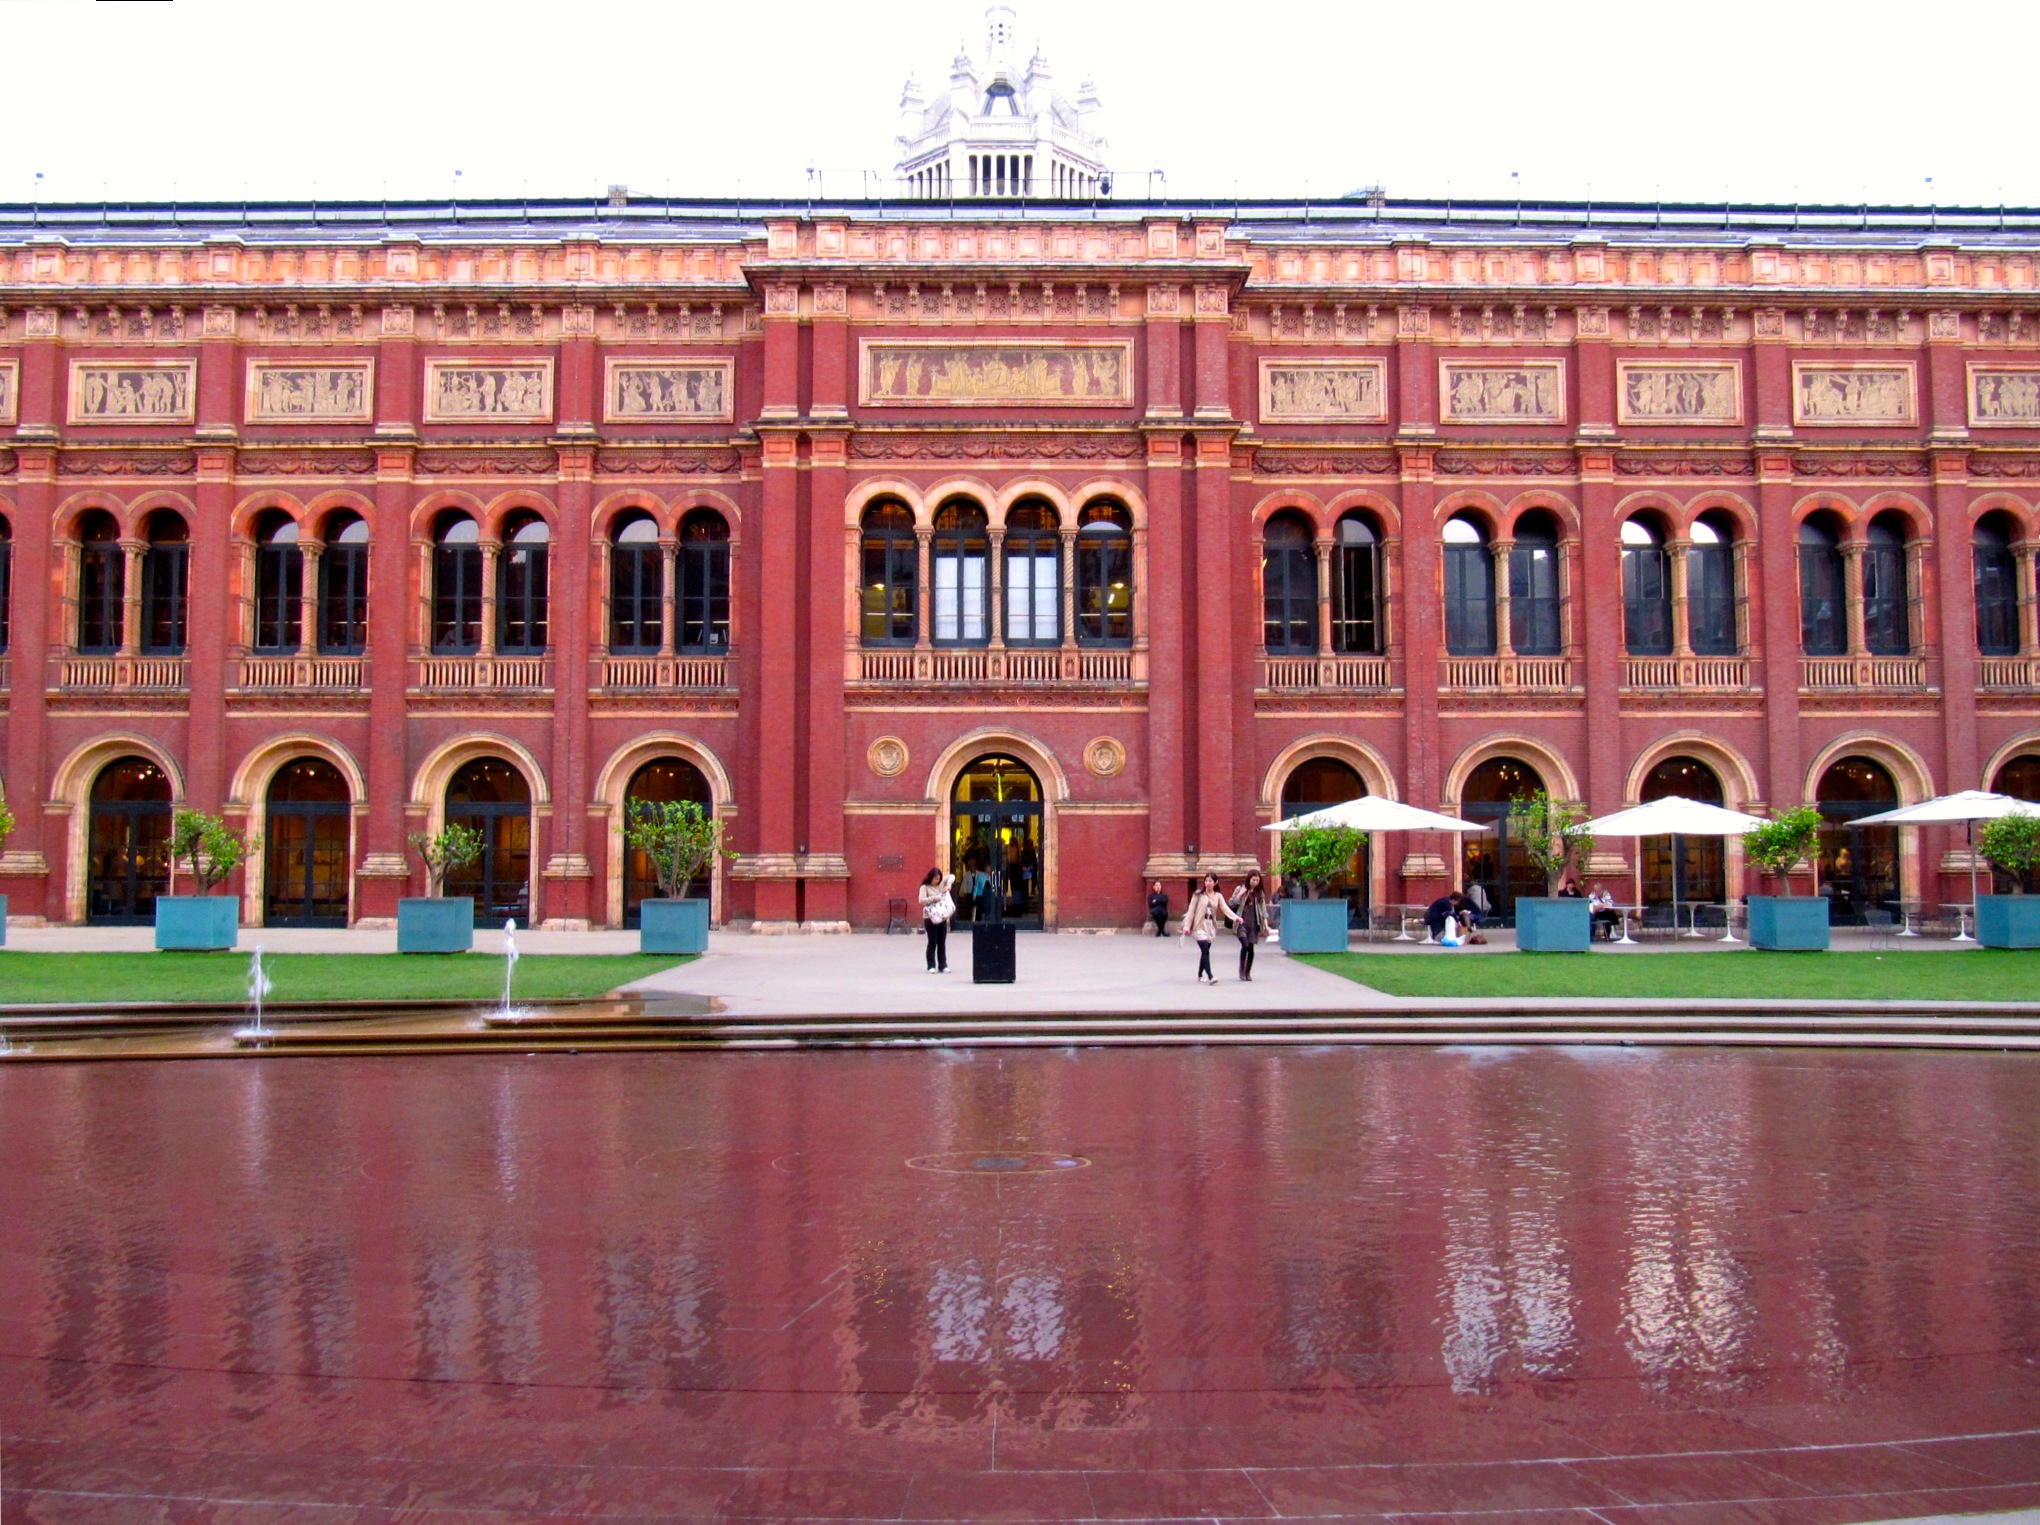 Courtyard at V&A Museum.